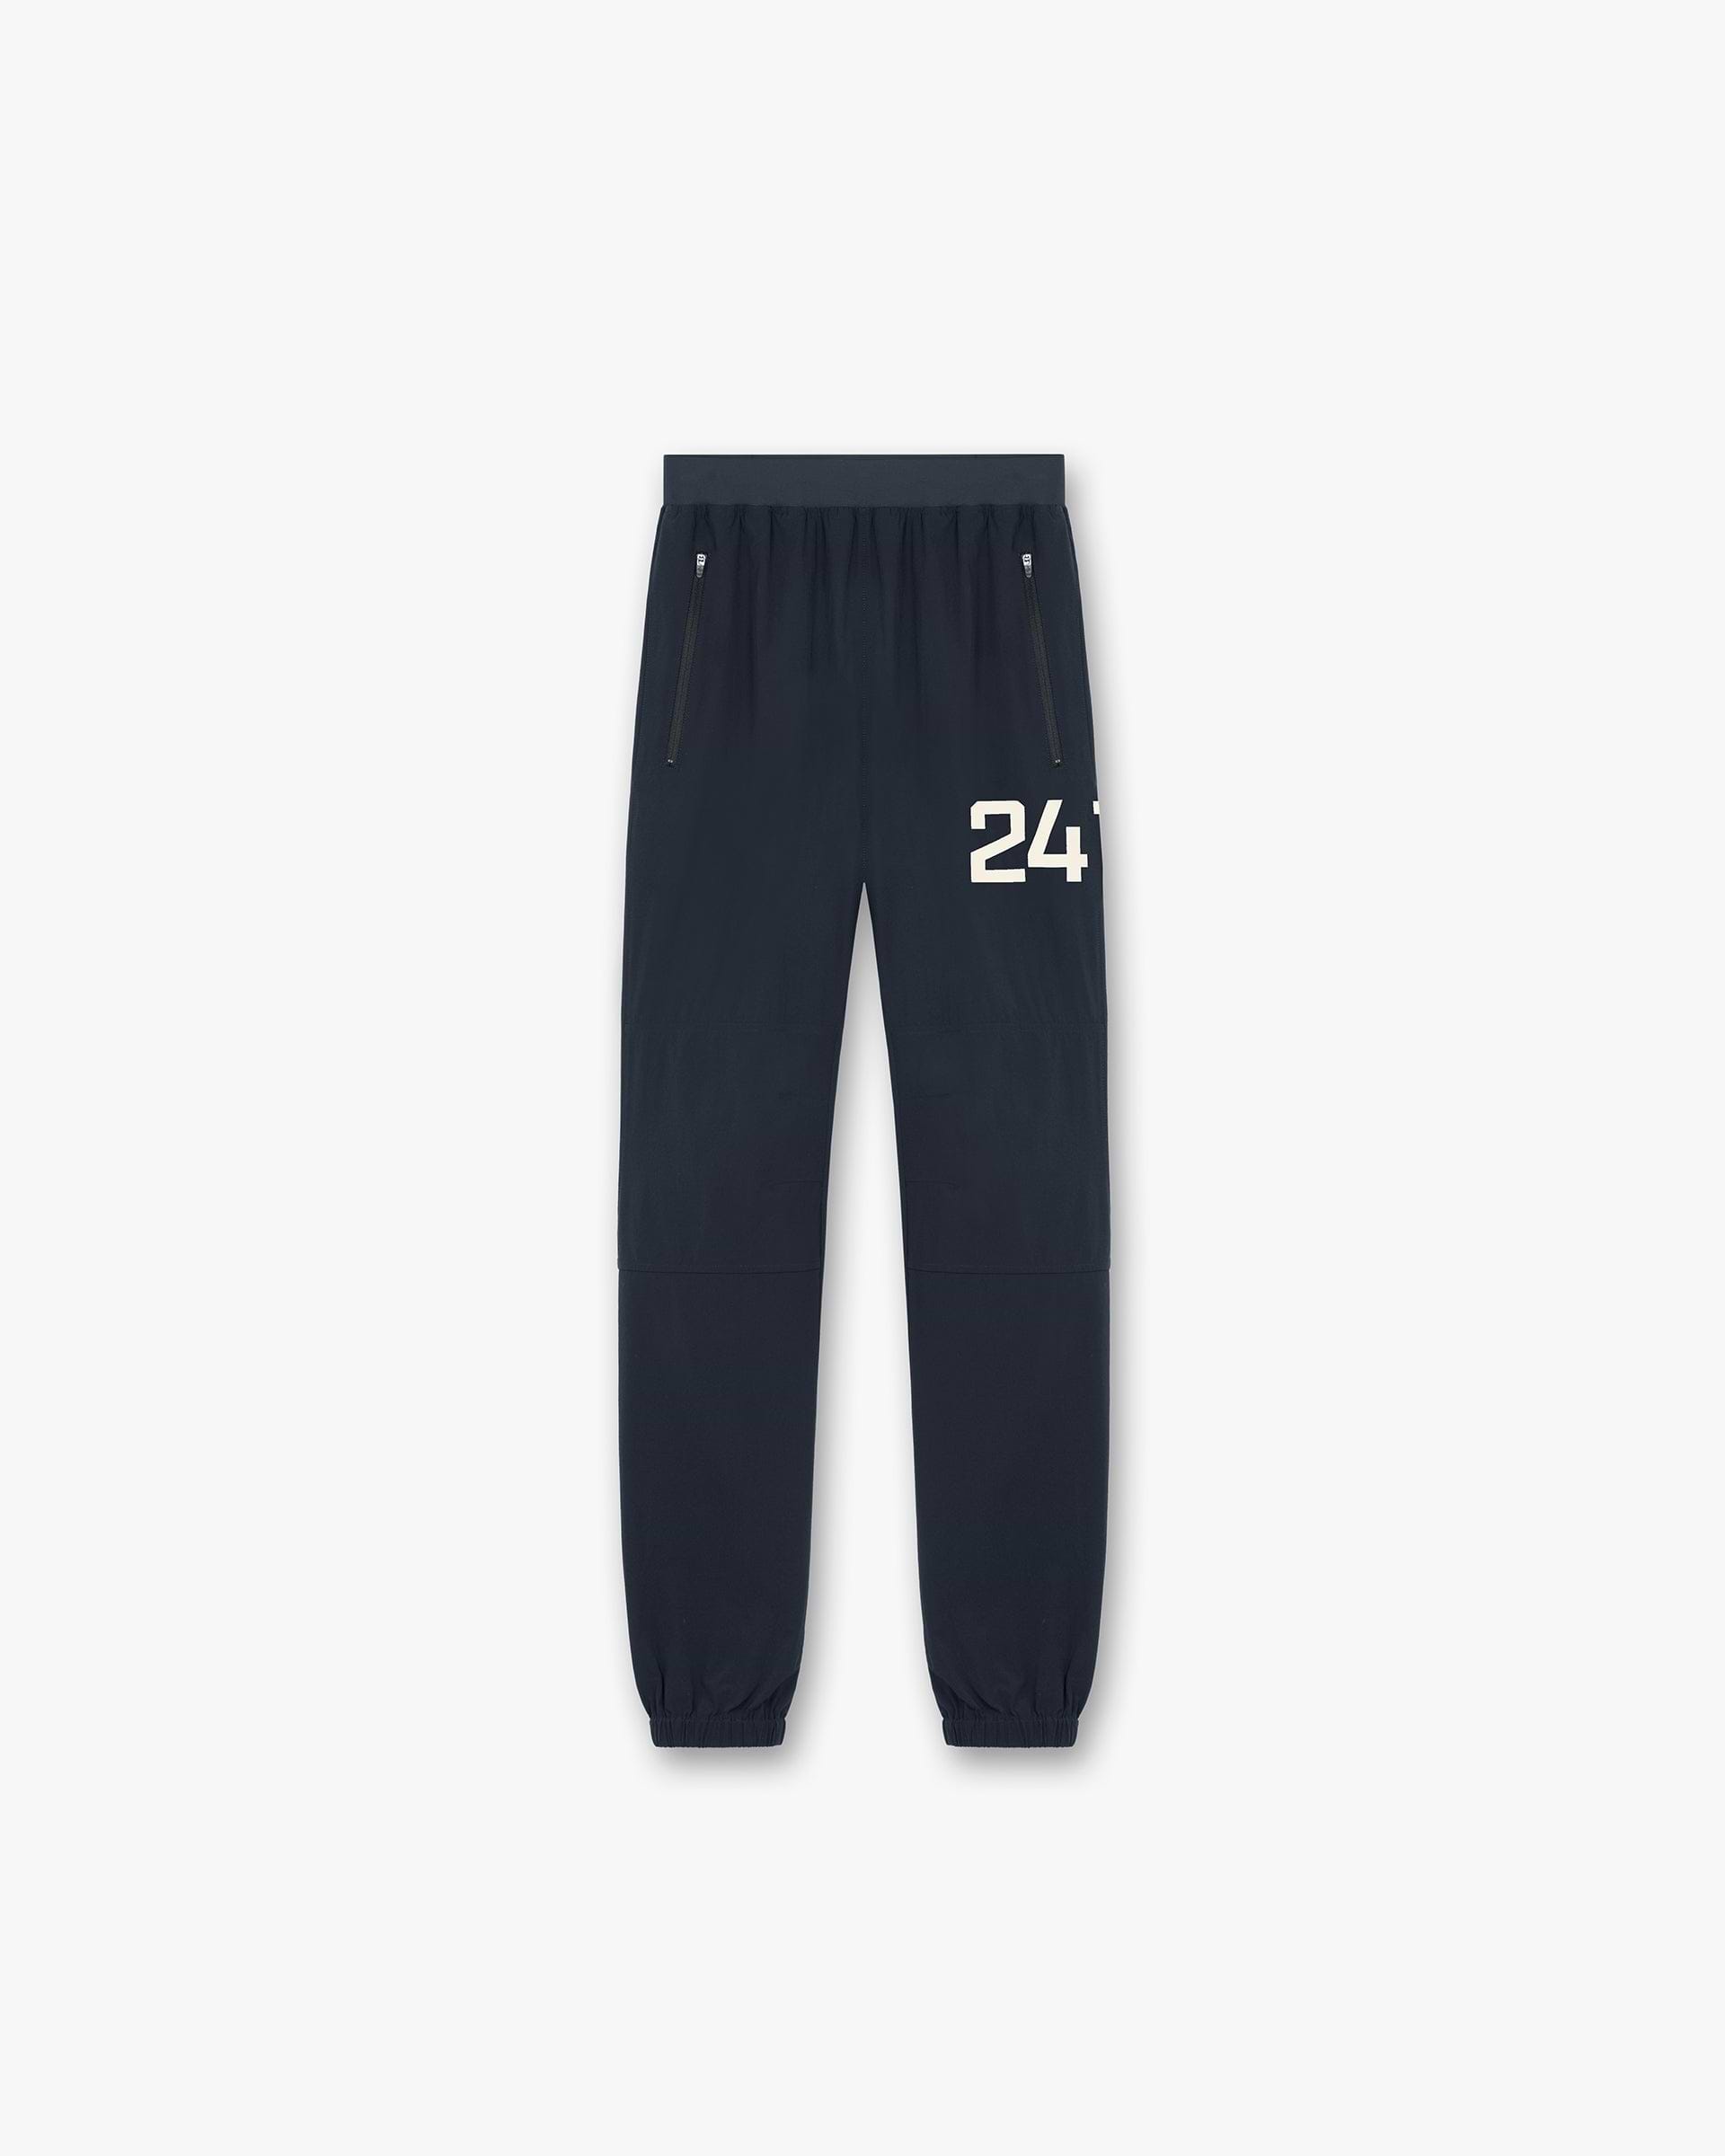 ANYONE KNOW WHERE I CAN COP THESE GREY BAGGY NIKE SWEATS? : r/Pandabuy